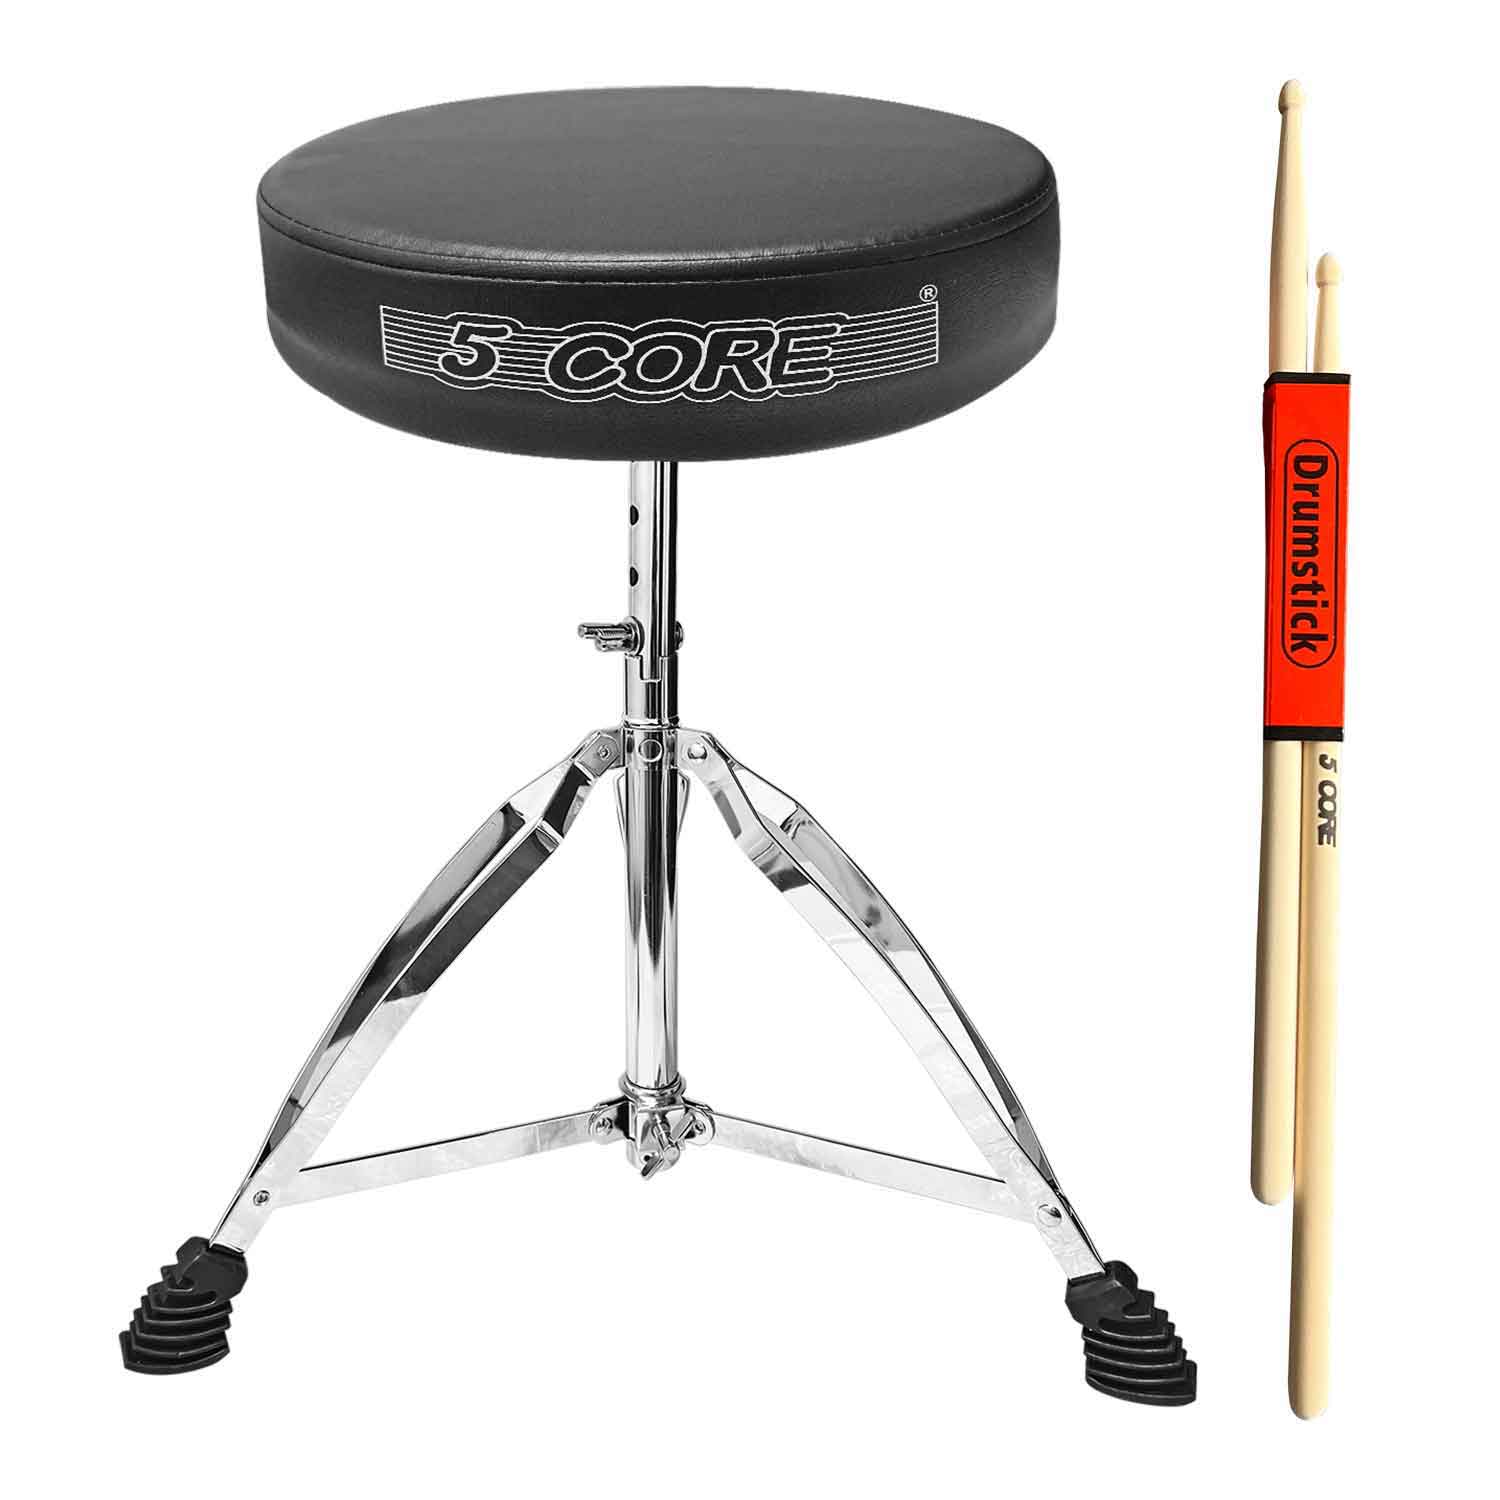 5 Core Drum Throne Guitar Stool Thick Padded Drummers Chair Piano Seat Chrome Black